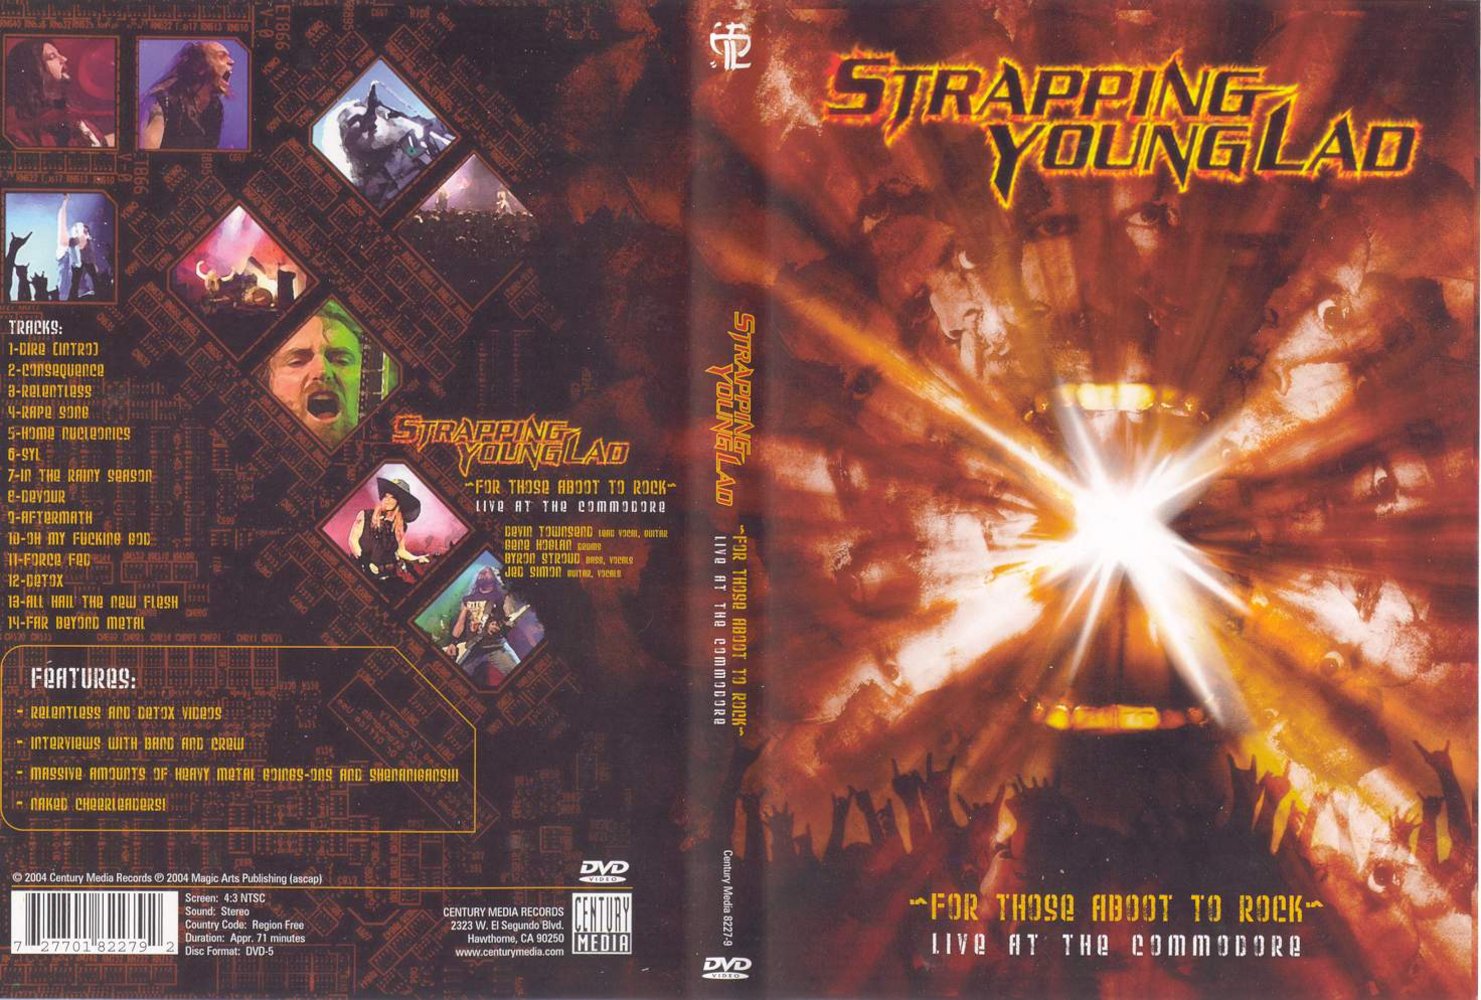 Jaquette DVD Strapping Young Lad for those aboot to rock